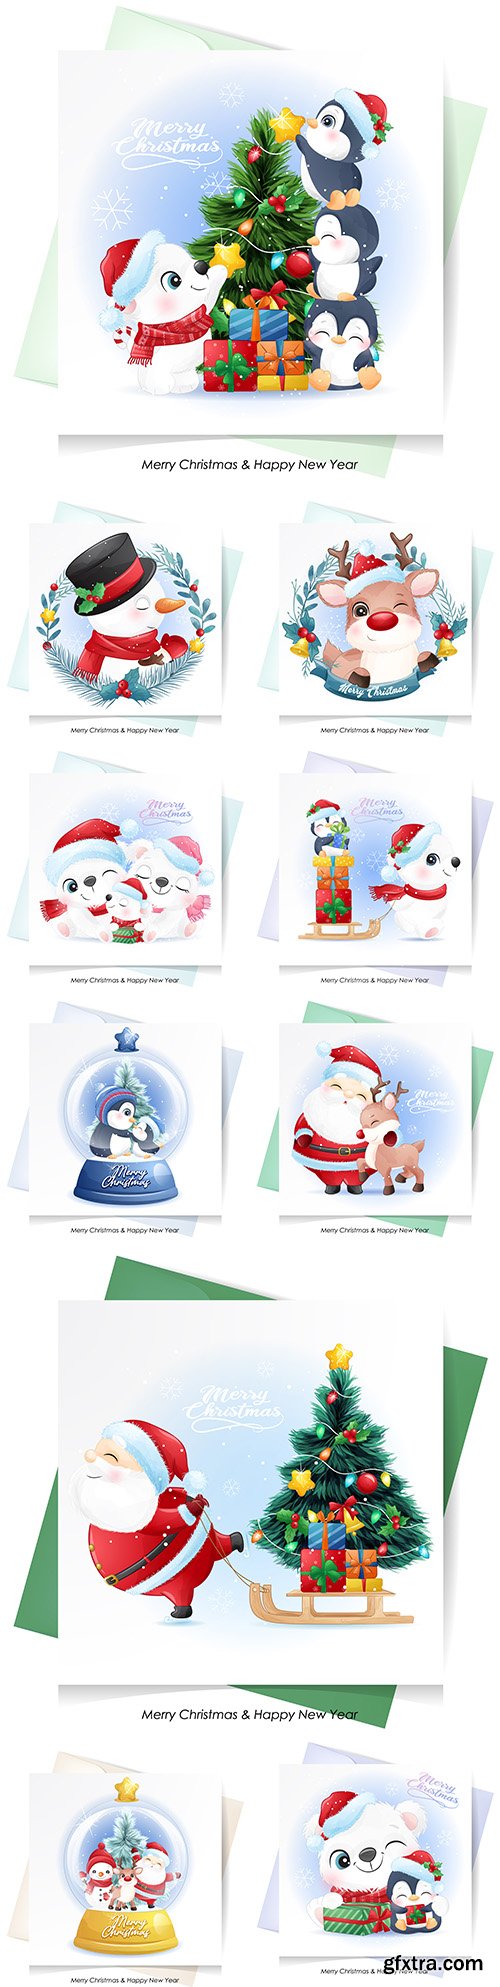 Cute Santa Claus, deer and snowman for Christmas with watercolor card